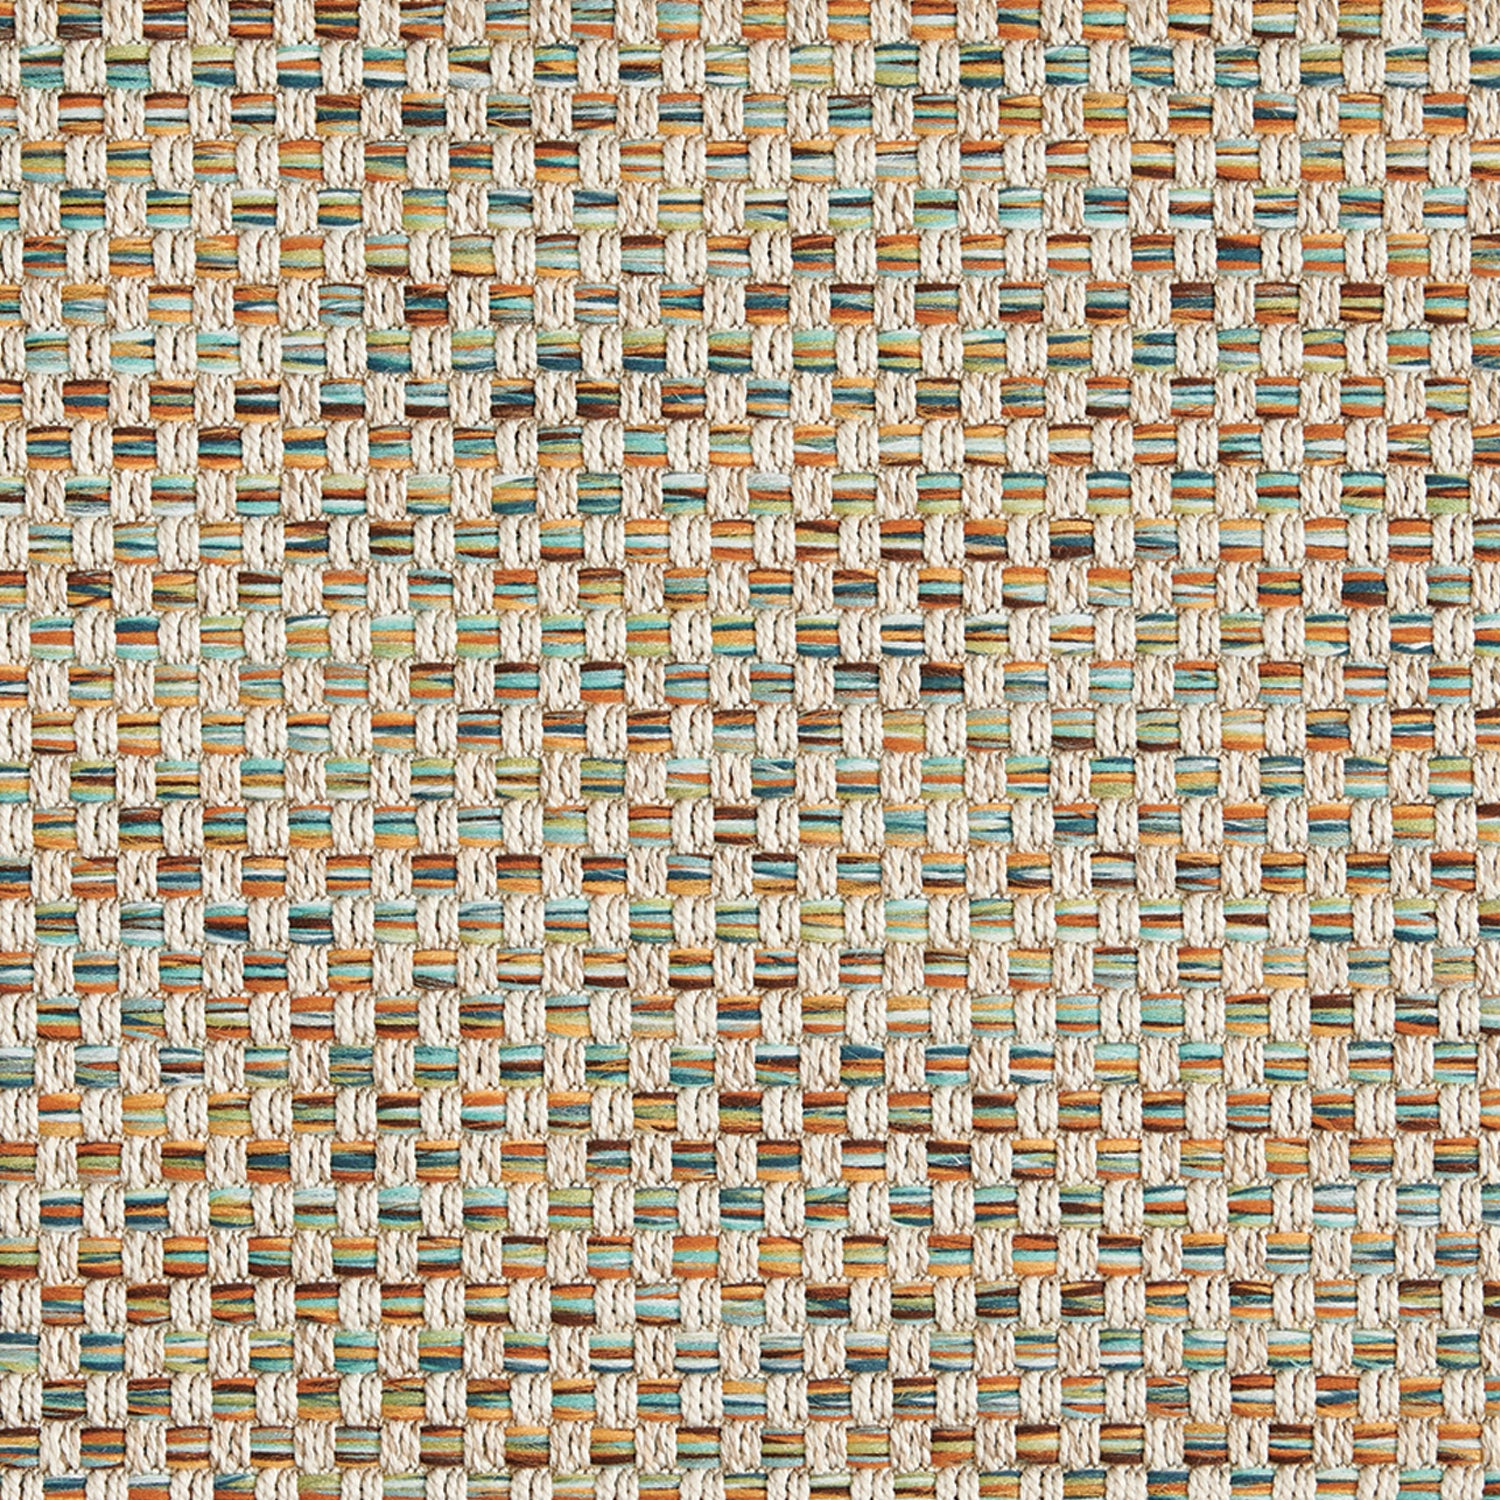 Outdoor broadloom carpet swatch in a large-scale grid weave in shades of cream, orange, green and blue.